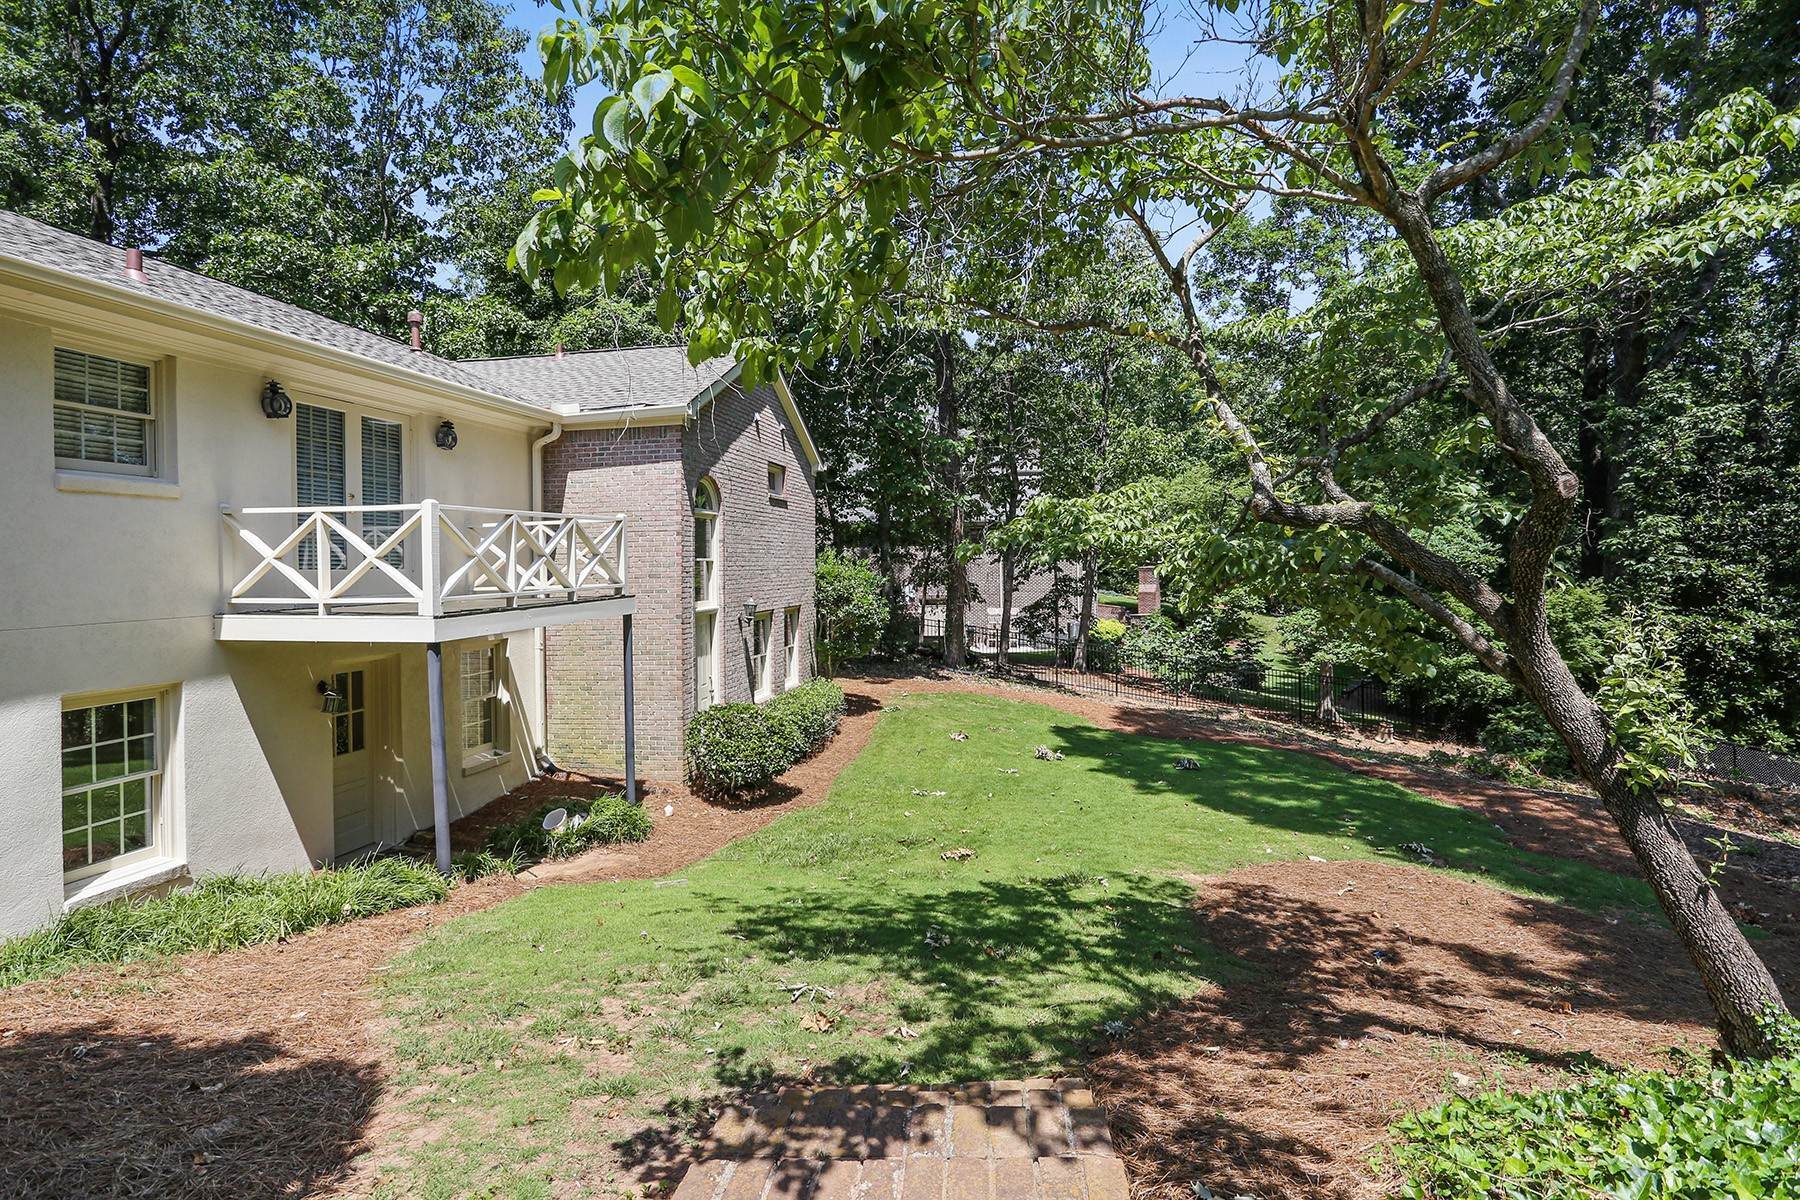 41. Single Family Homes for Sale at Beautiful Home on Private 2.1+/- Acre Lot 405 Heards Ferry Road Sandy Springs, Georgia 30328 United States